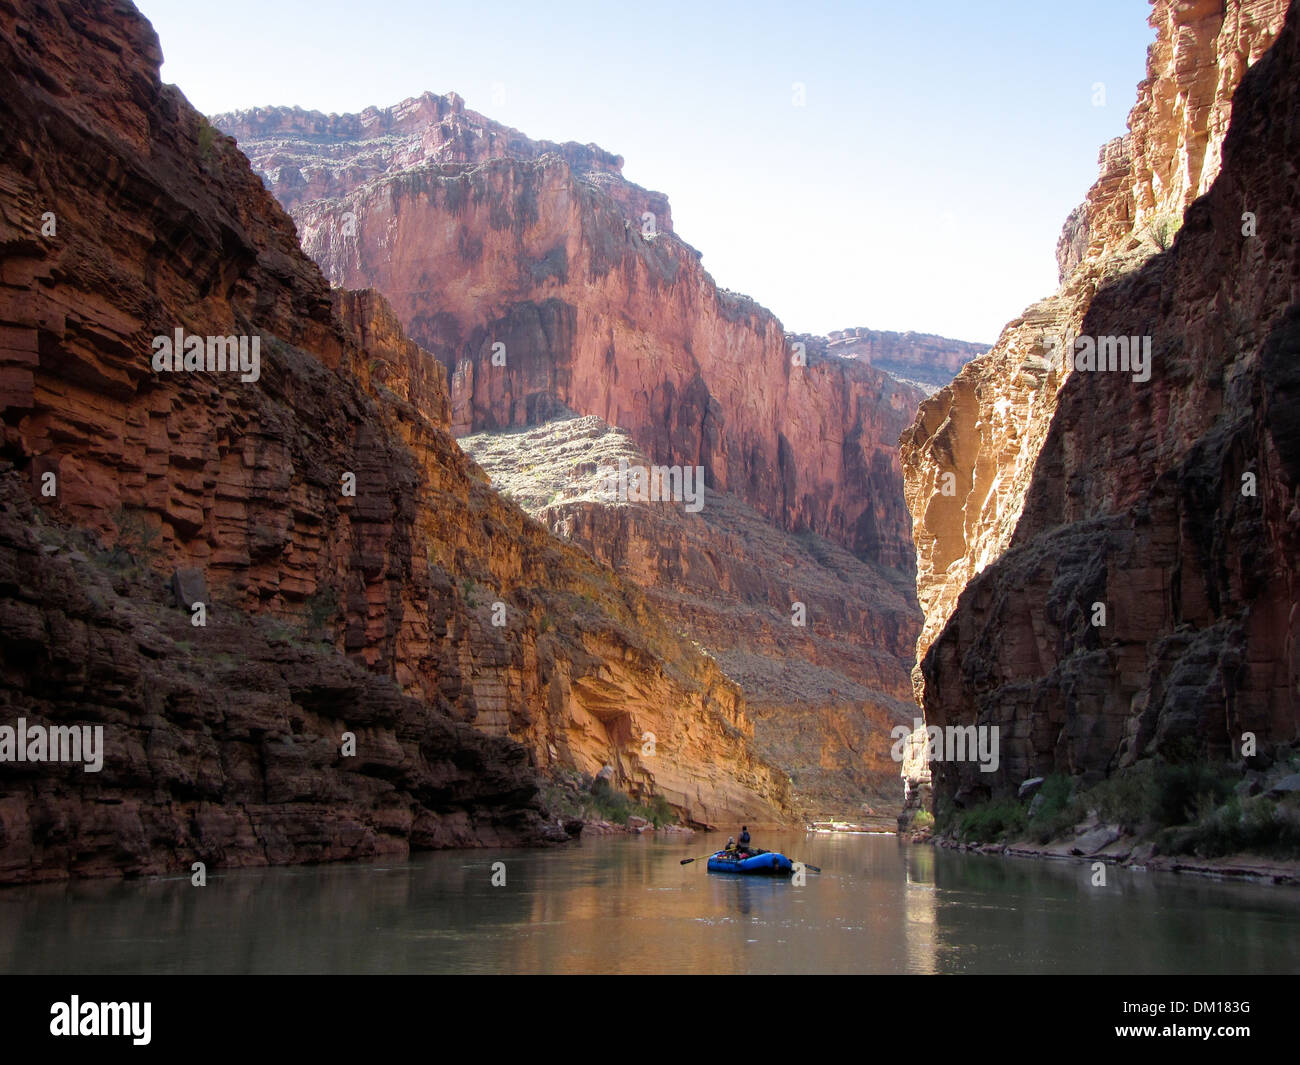 Lone raft in the Grand Canyon Stock Photo